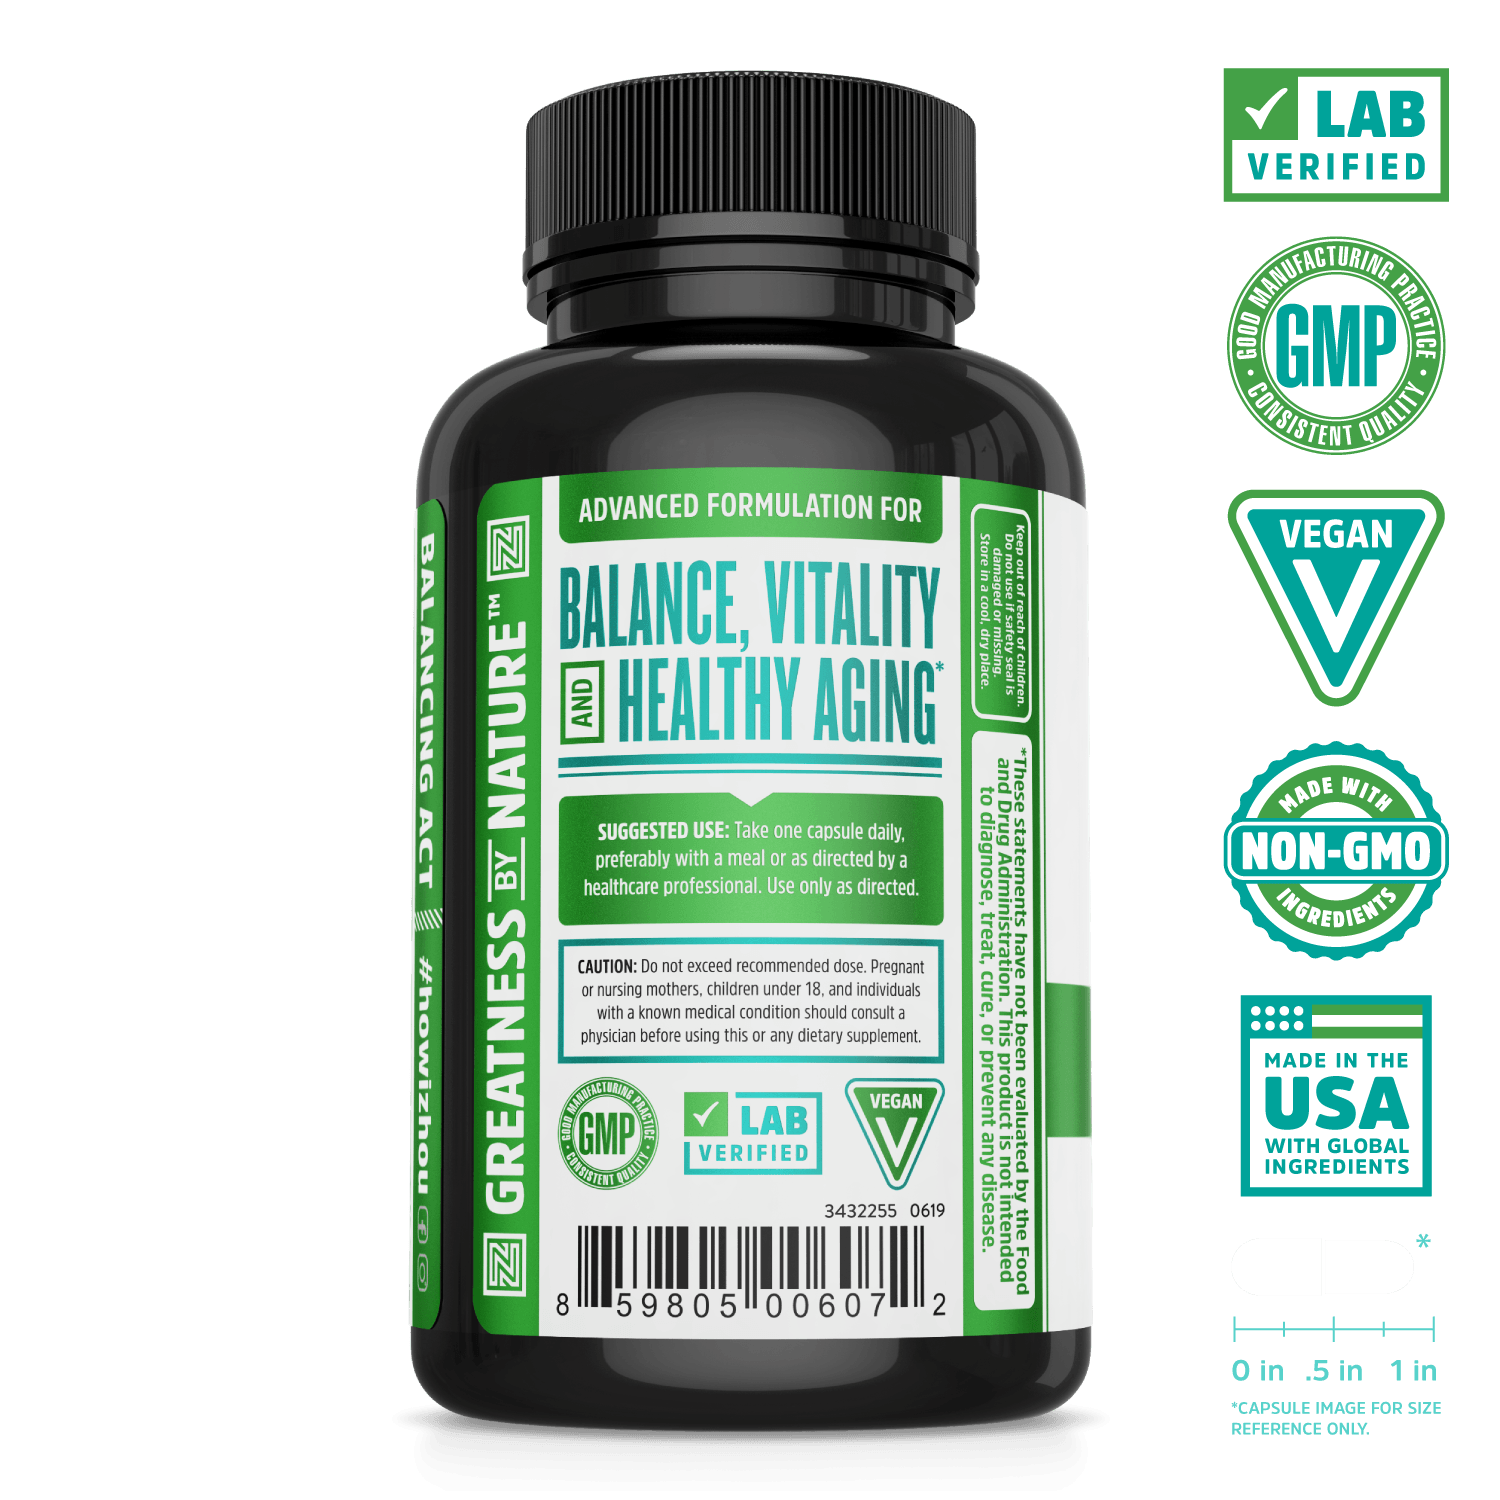 Hormonal Balance Complex with activated broccoli extract from Zhou Nutrition. Bottle side. Lab verified, good manufacturing practices, vegan, made with non-GMO ingredients, made in the USA with global ingredients.